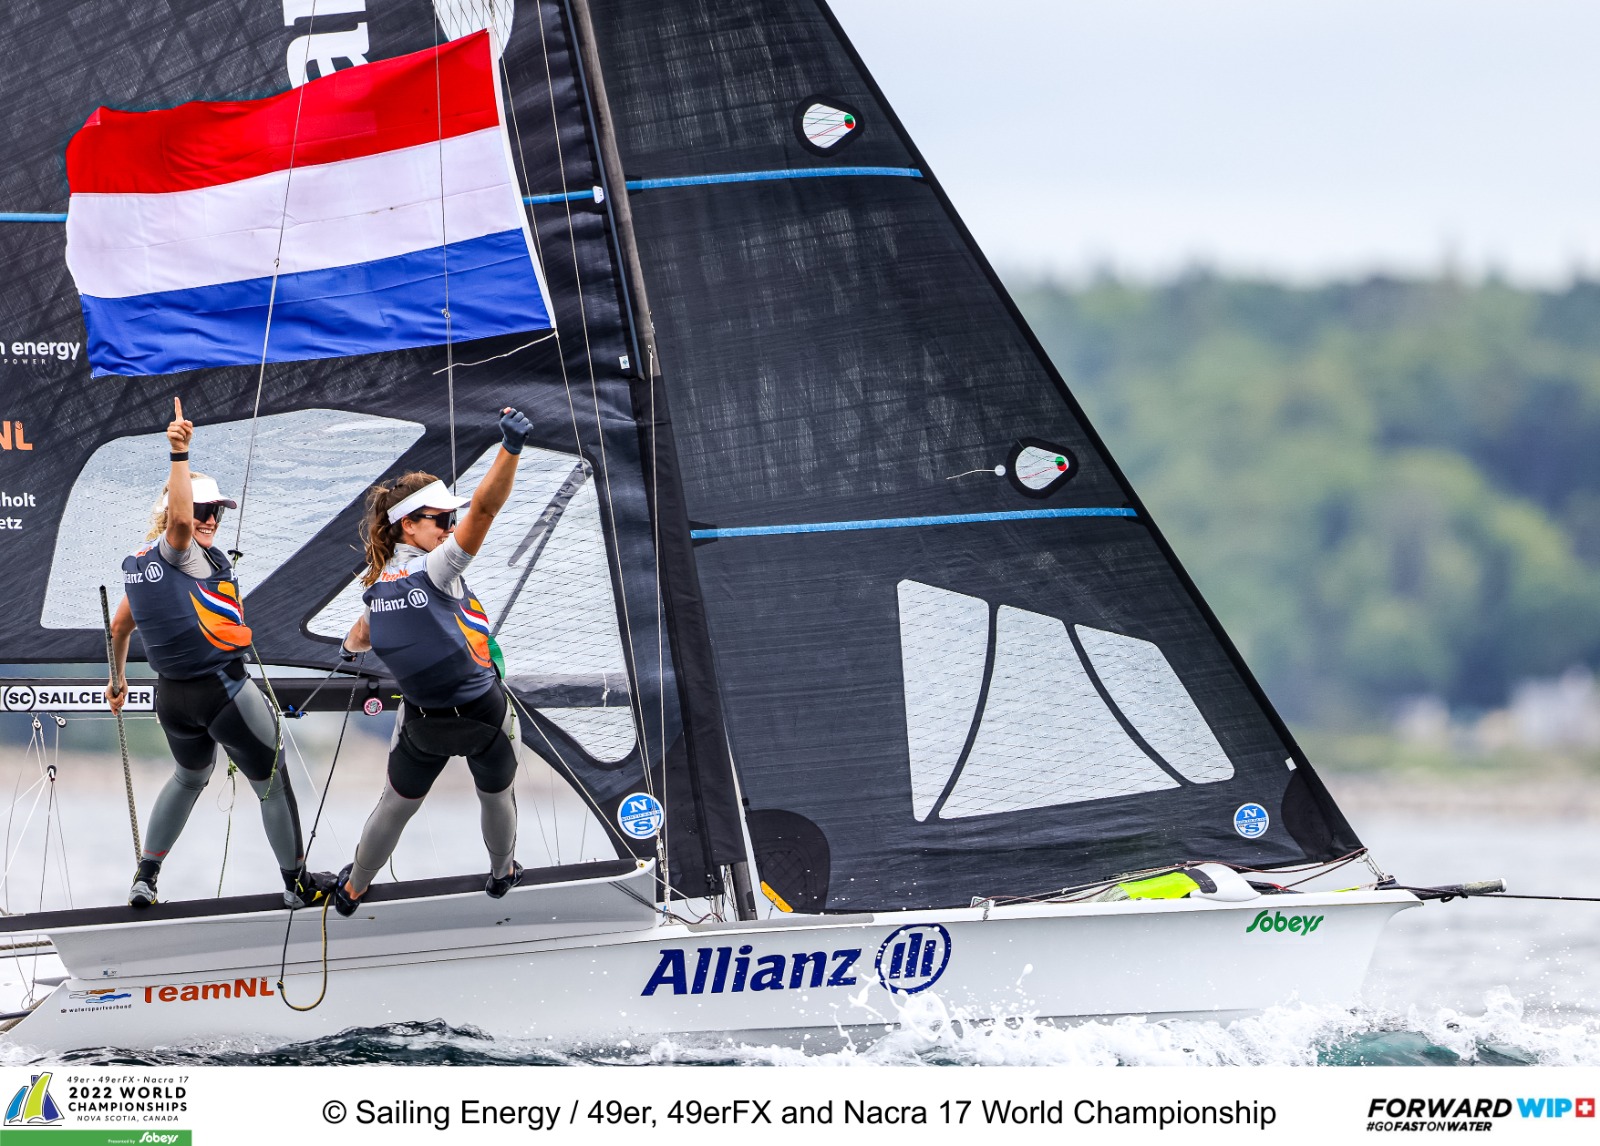 Odile van Aanholt and Annette Duetz (NED) win 49erFX World Championship